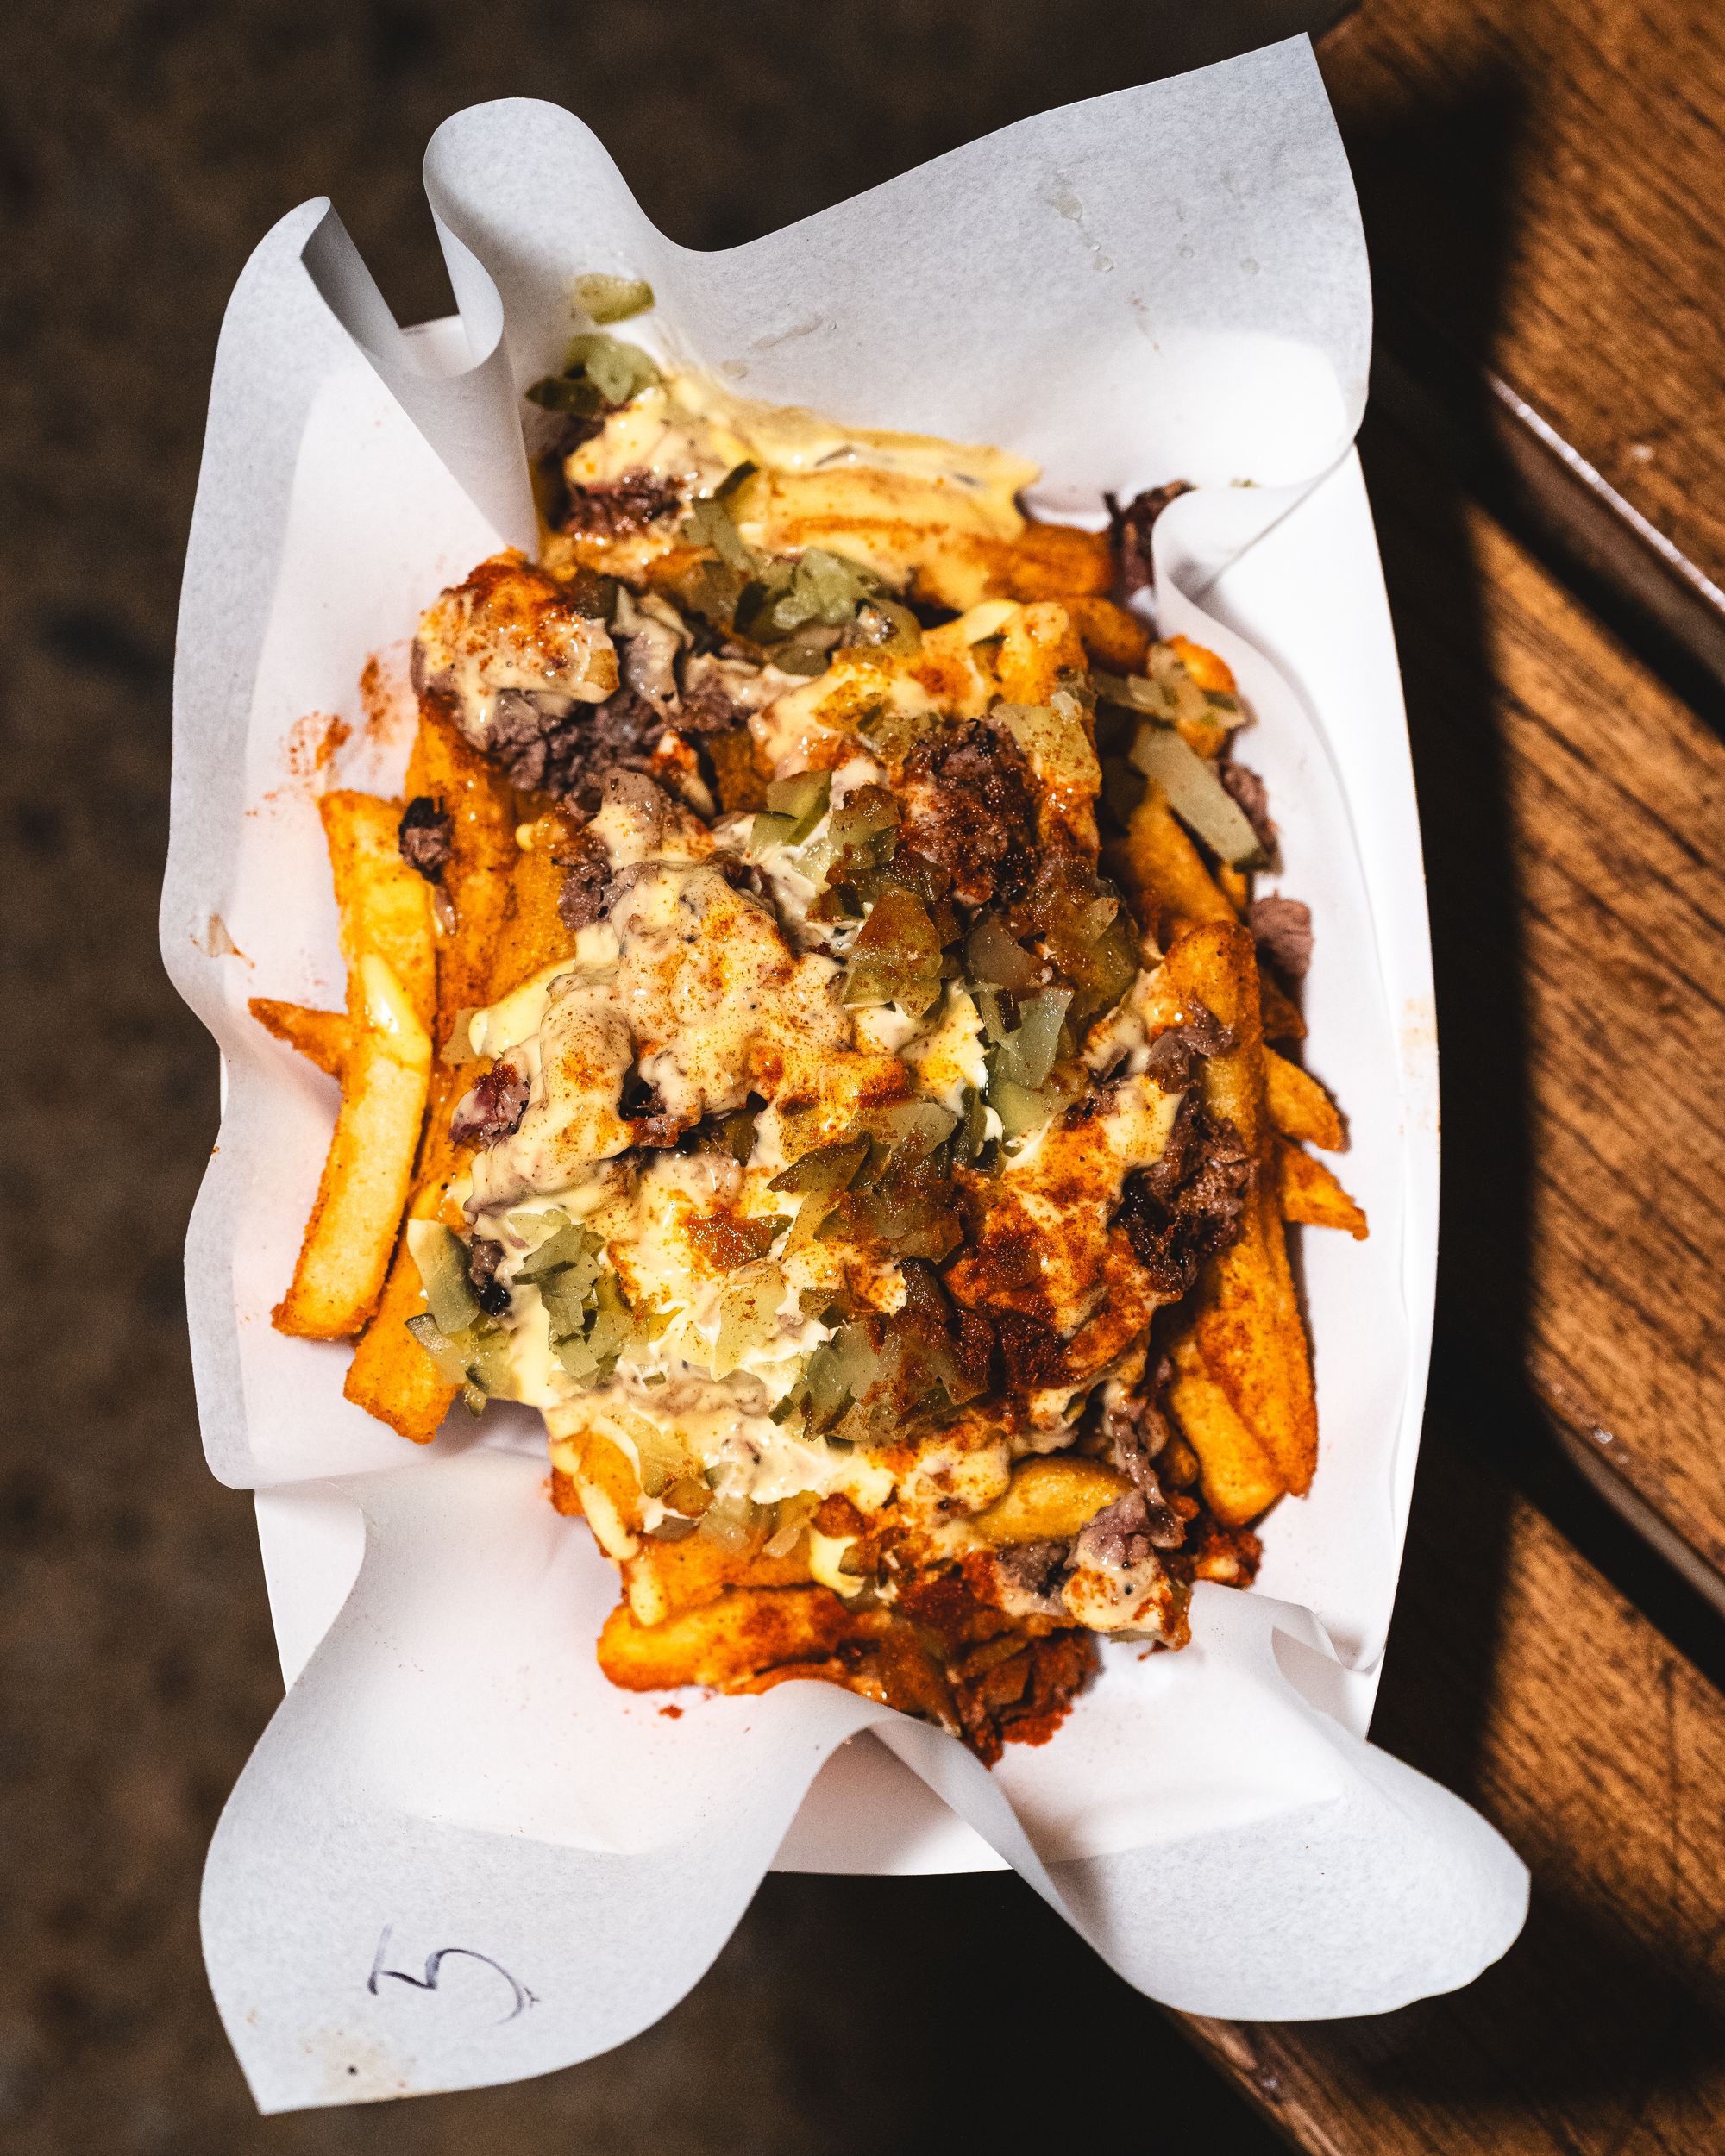 Top down shot of dirty fries with queso, fries, pickles and chopped brisket